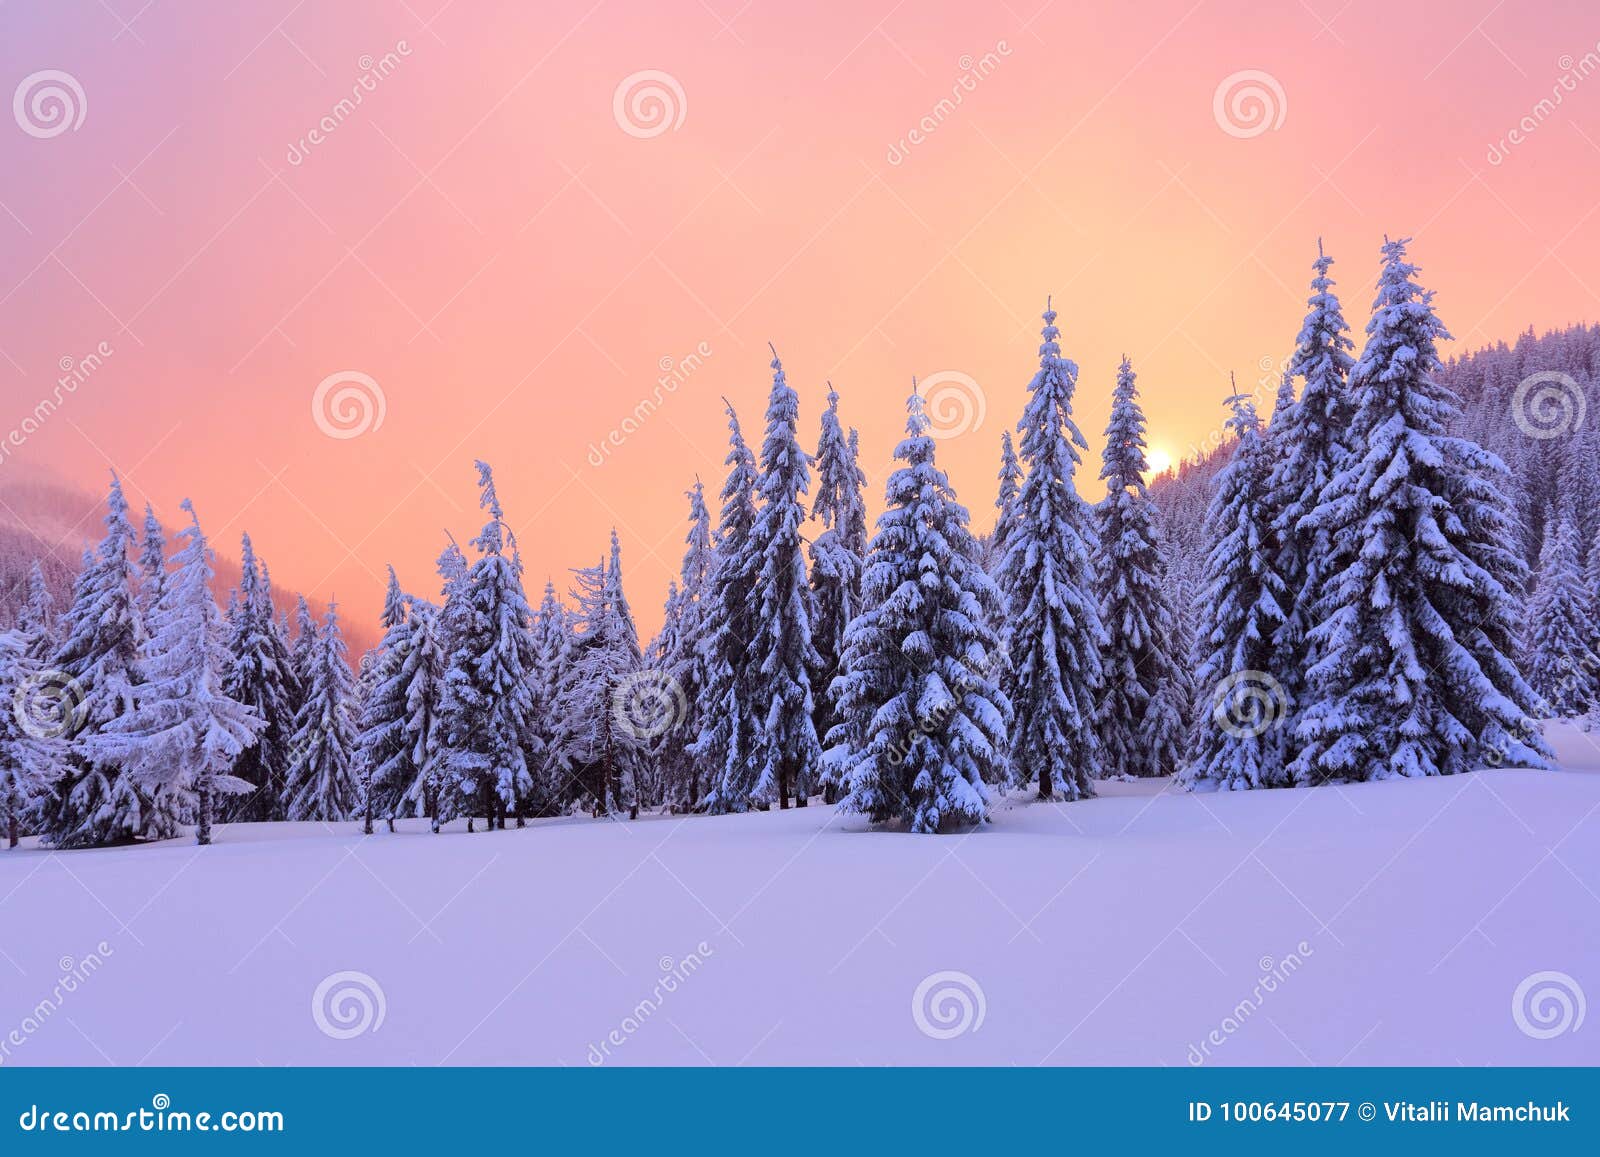 marvelous winter sunrise high in the mountains in beautiful forests and fields.